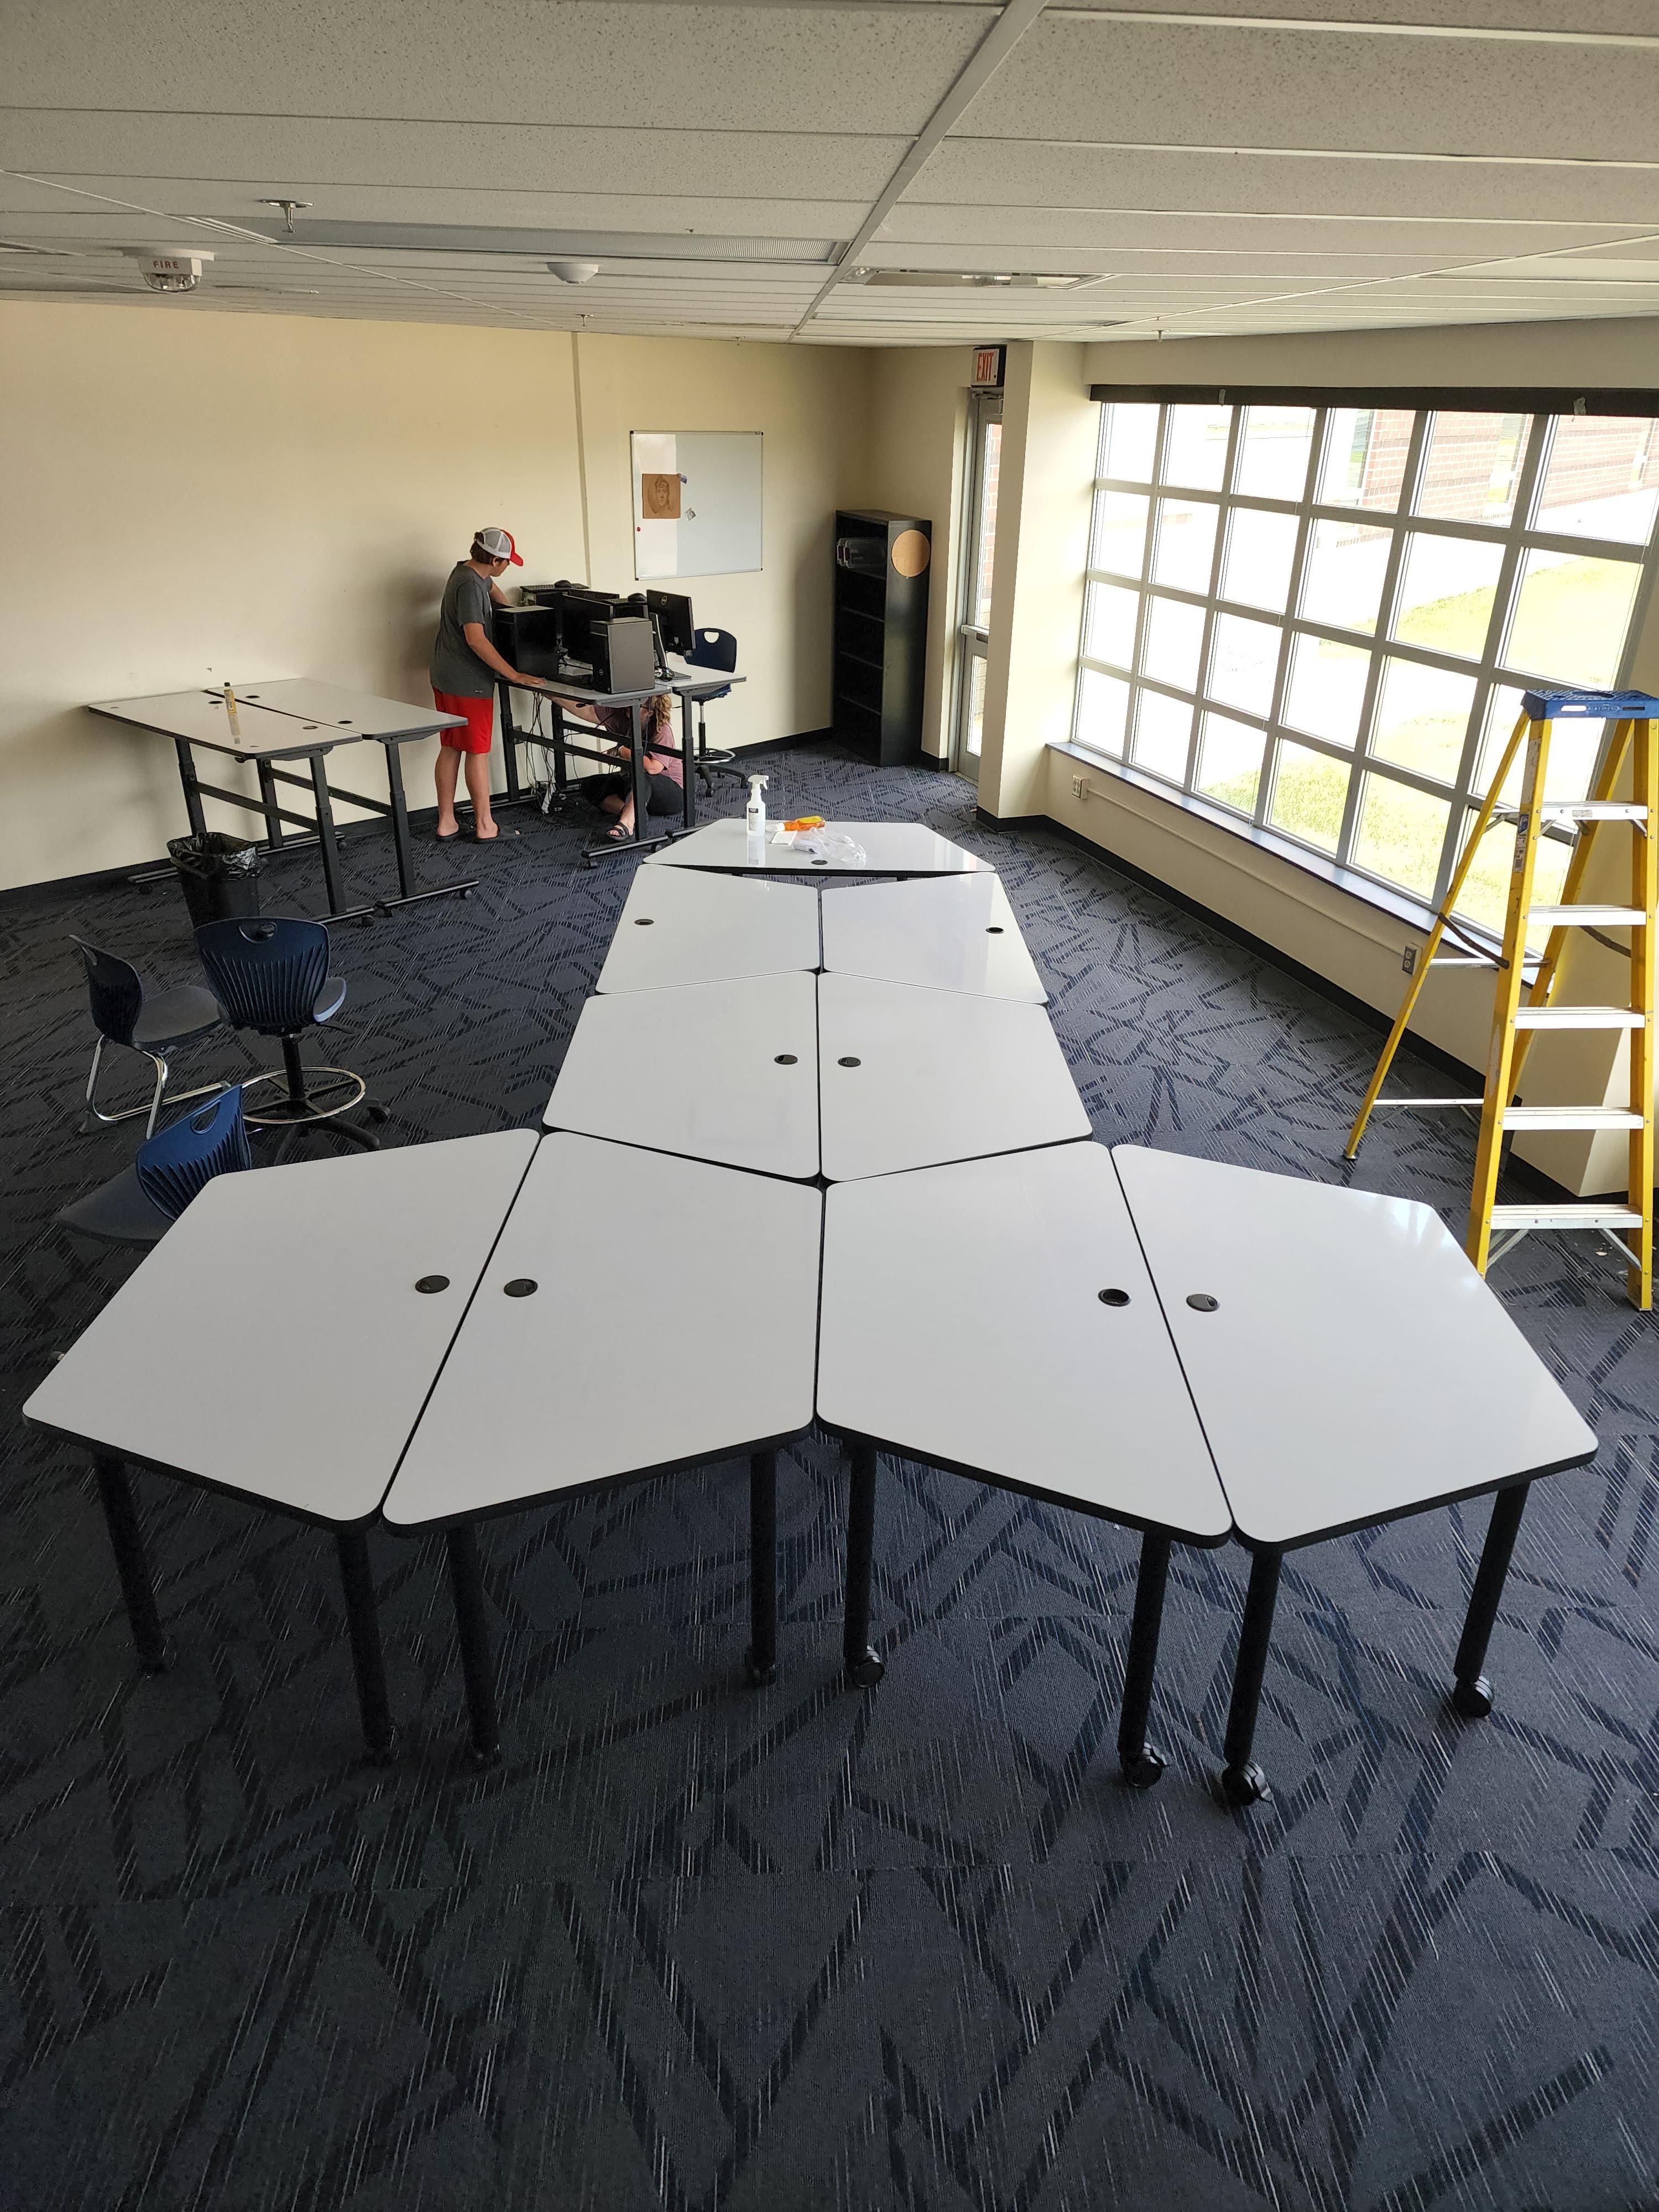 My wife asked our teenager to help set up tables in her classroom. Instant regrets